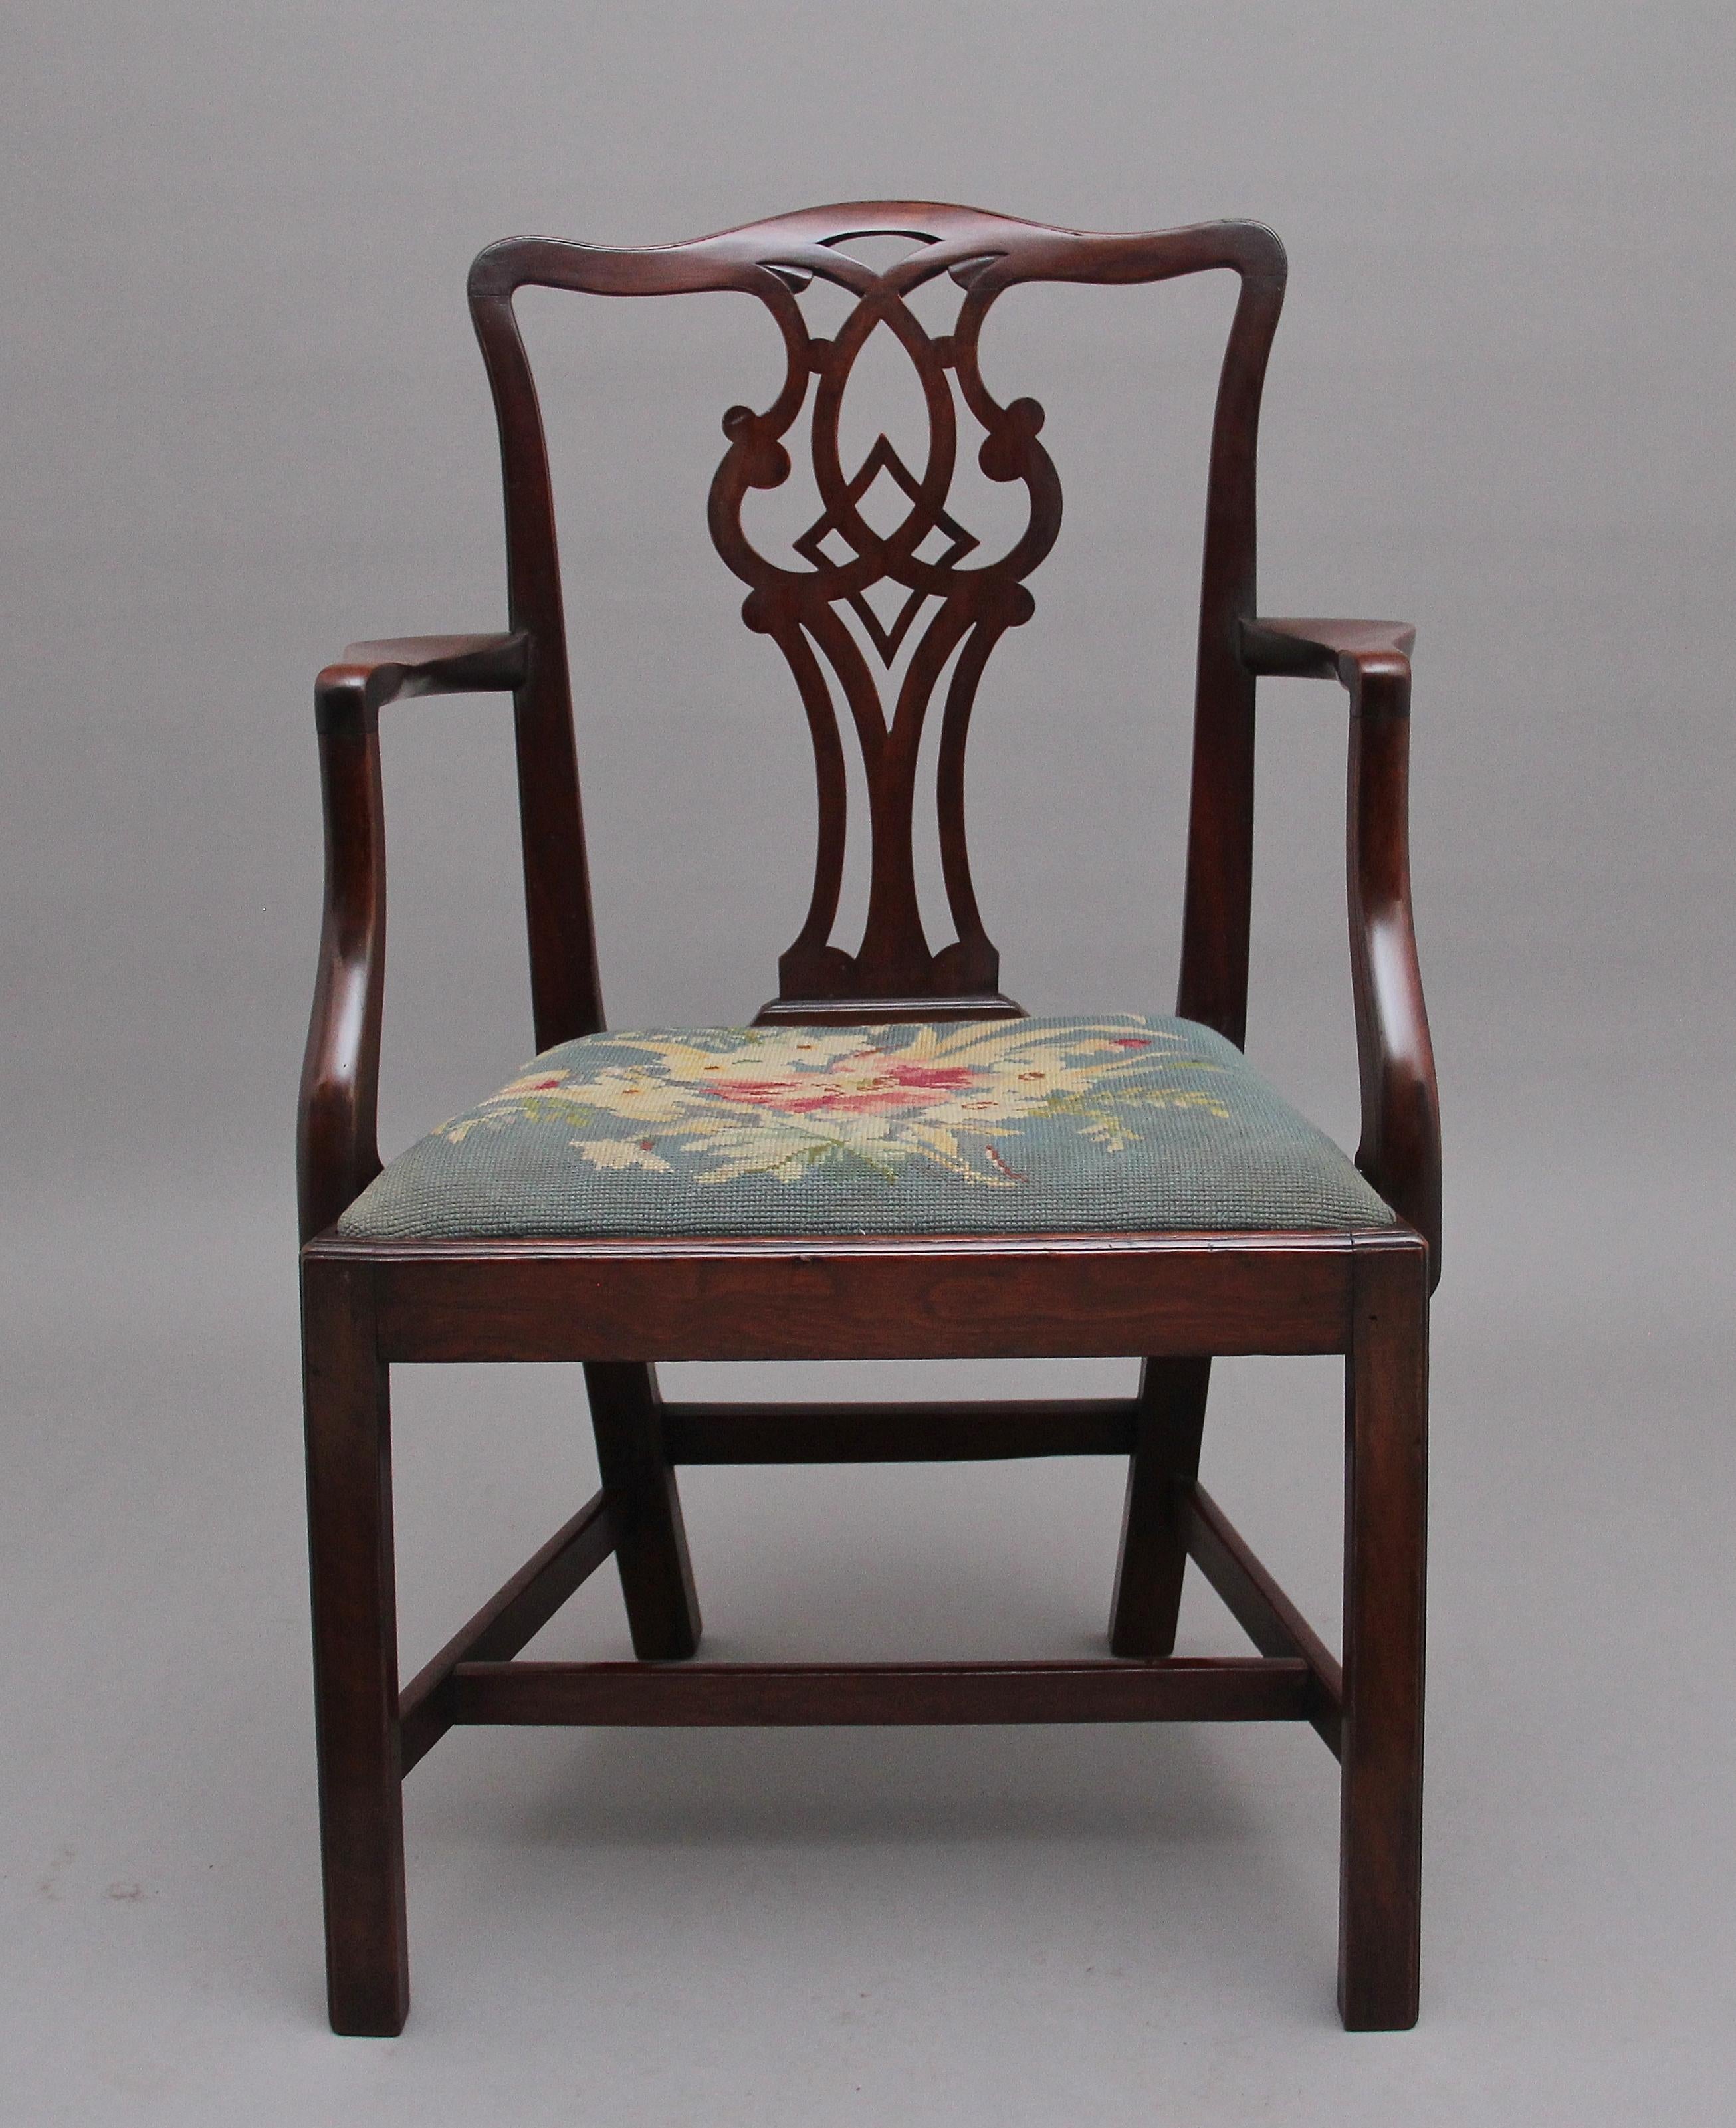 19th Century mahogany armchair in the Chippendale style, with a pierced splat in the back, the slender curved supports leading down to a needlepoint drop in upholstered seat, supported on square legs united with side, front and back stretchers.